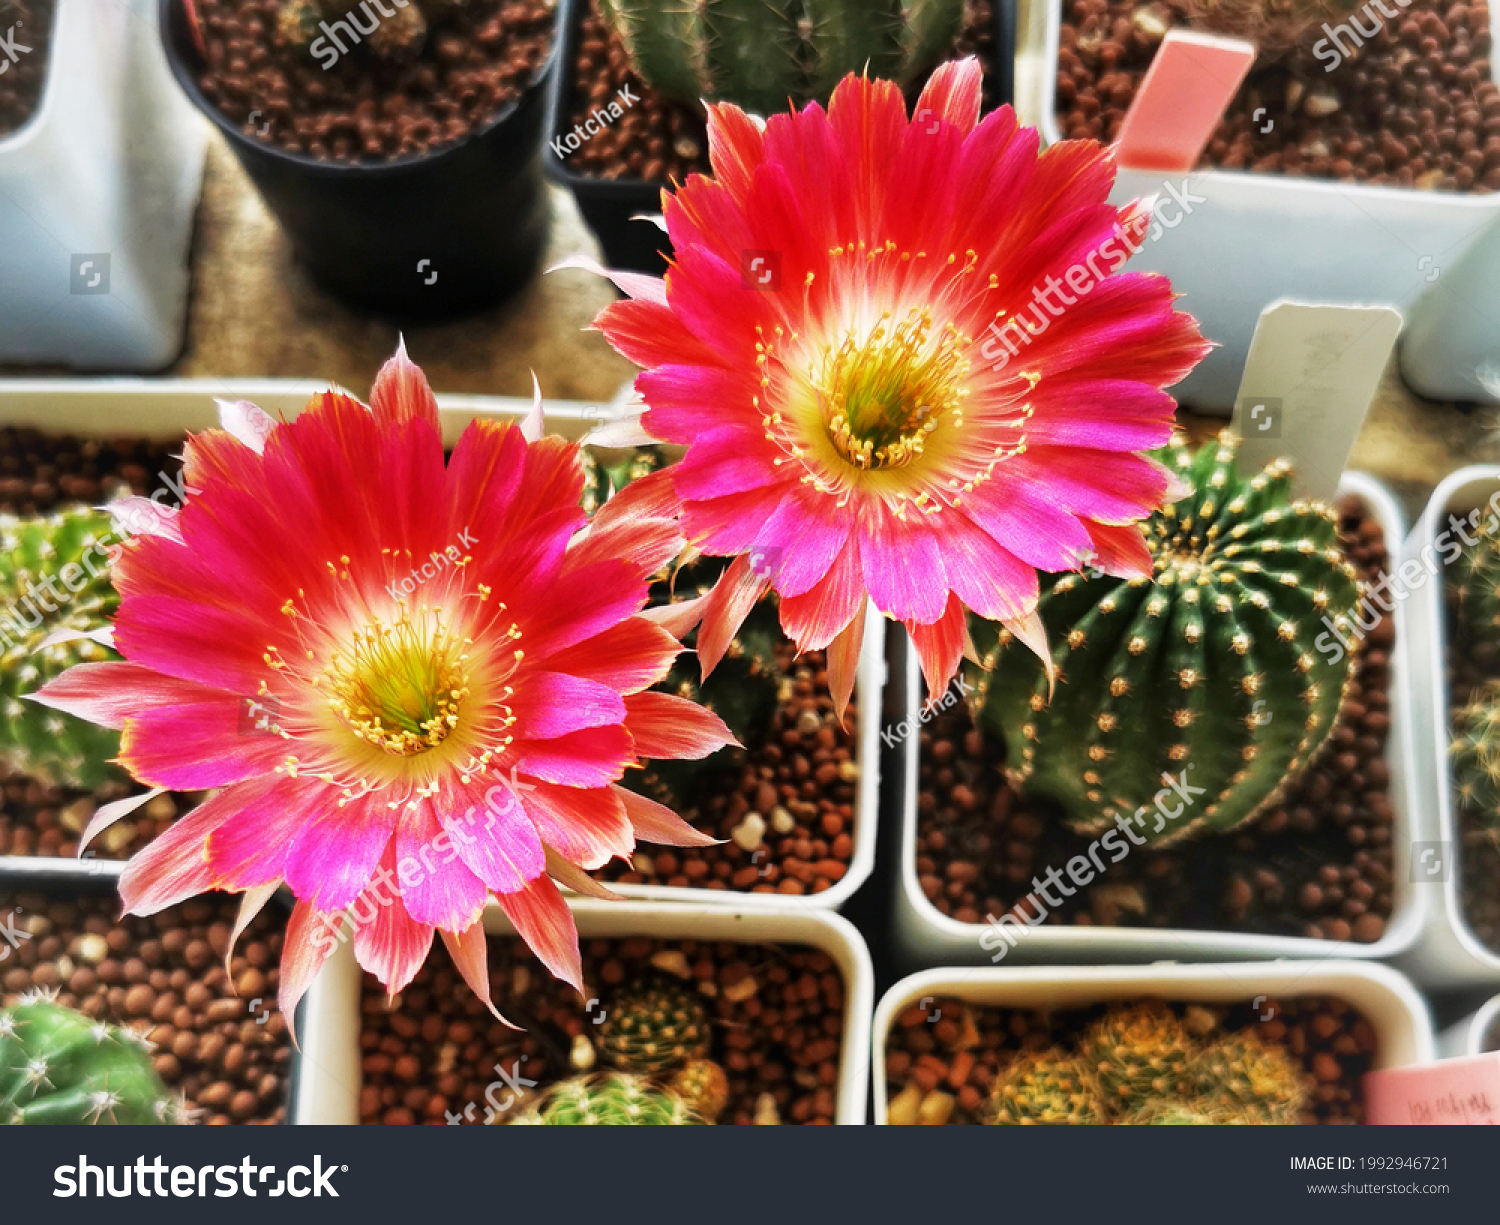 cactus with pink flower on top